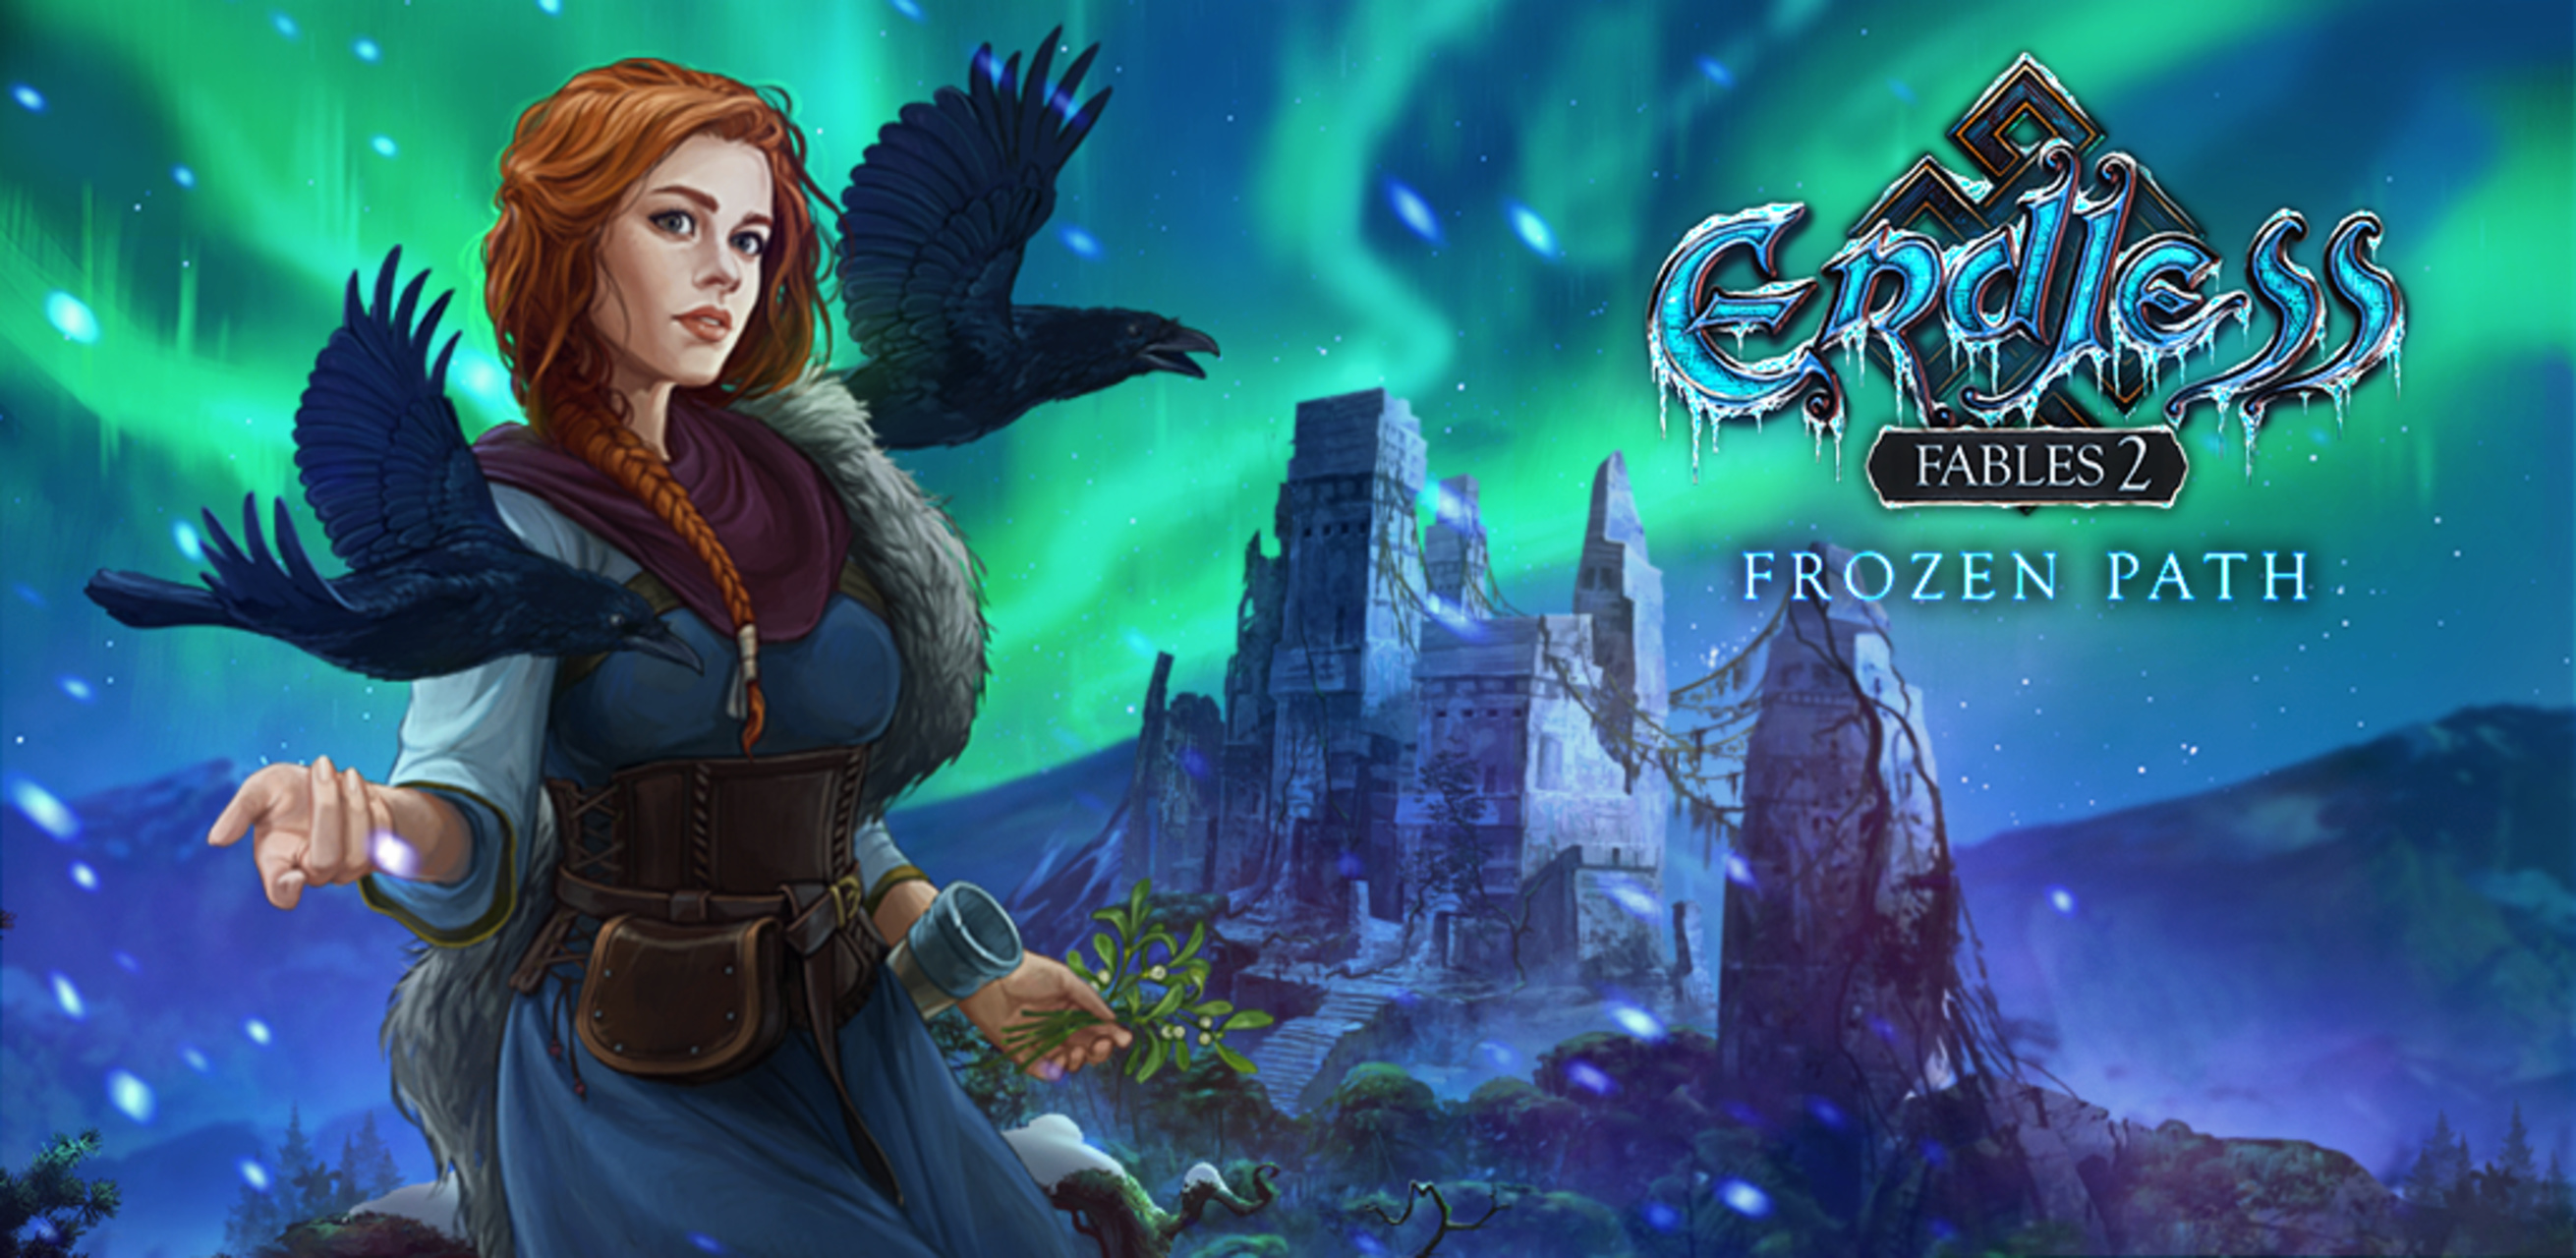 Endless Fables 2: Frozen Path download the new for windows